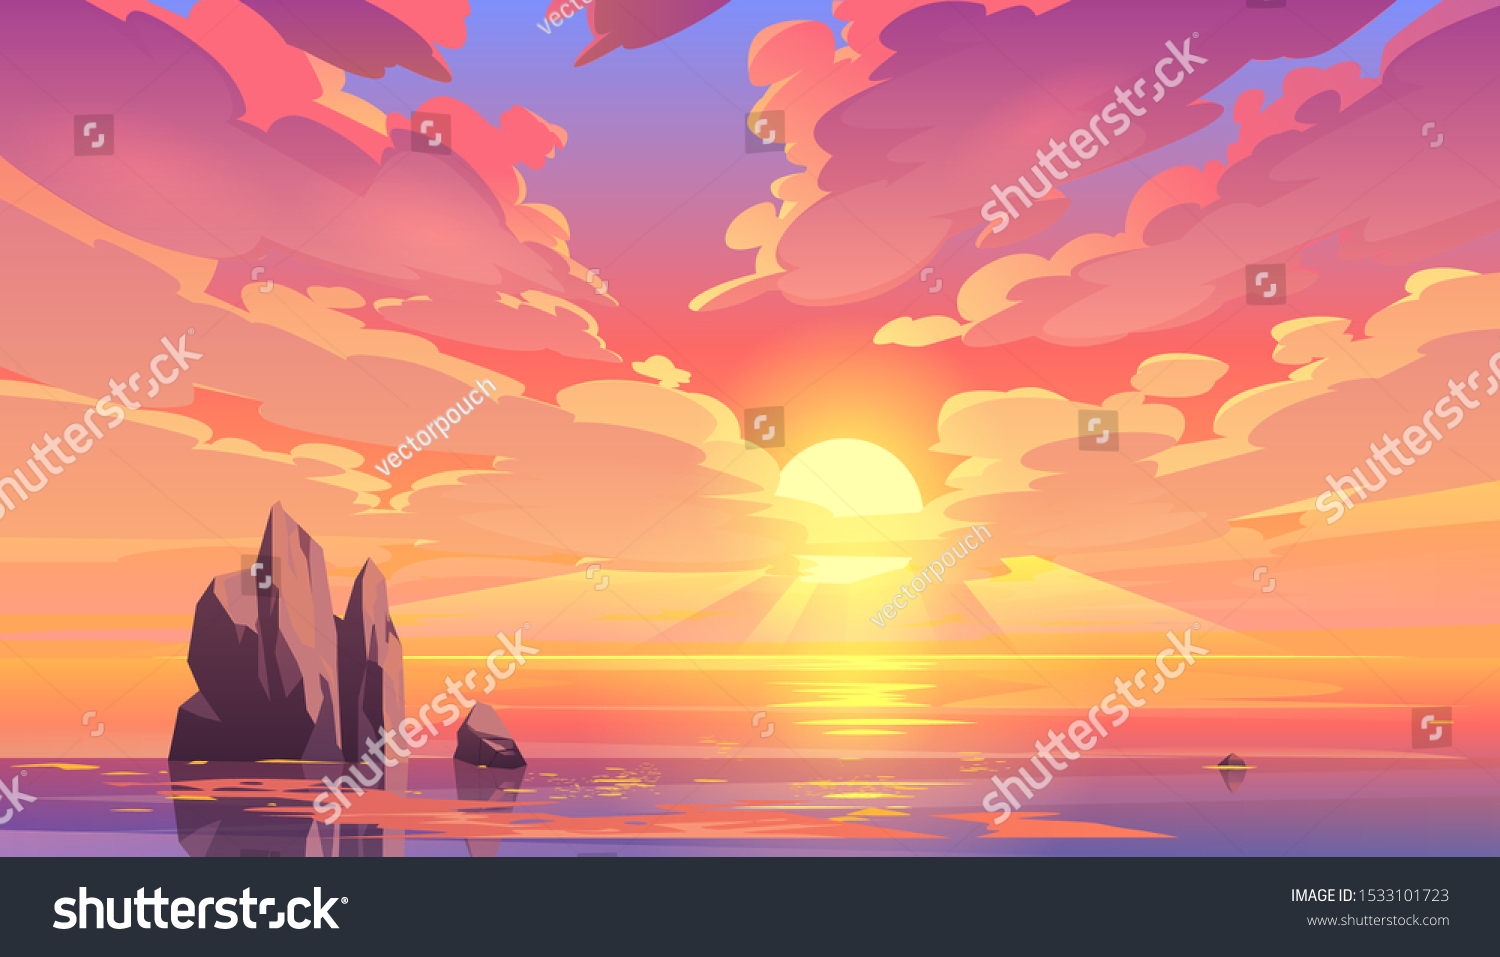 Sunset or sunrise in ocean, nature landscape background, pink clouds flying in sky to shining sun above sea with rocks sticking up of water surface. Evening or morning view Cartoon vector illustration #1533101723